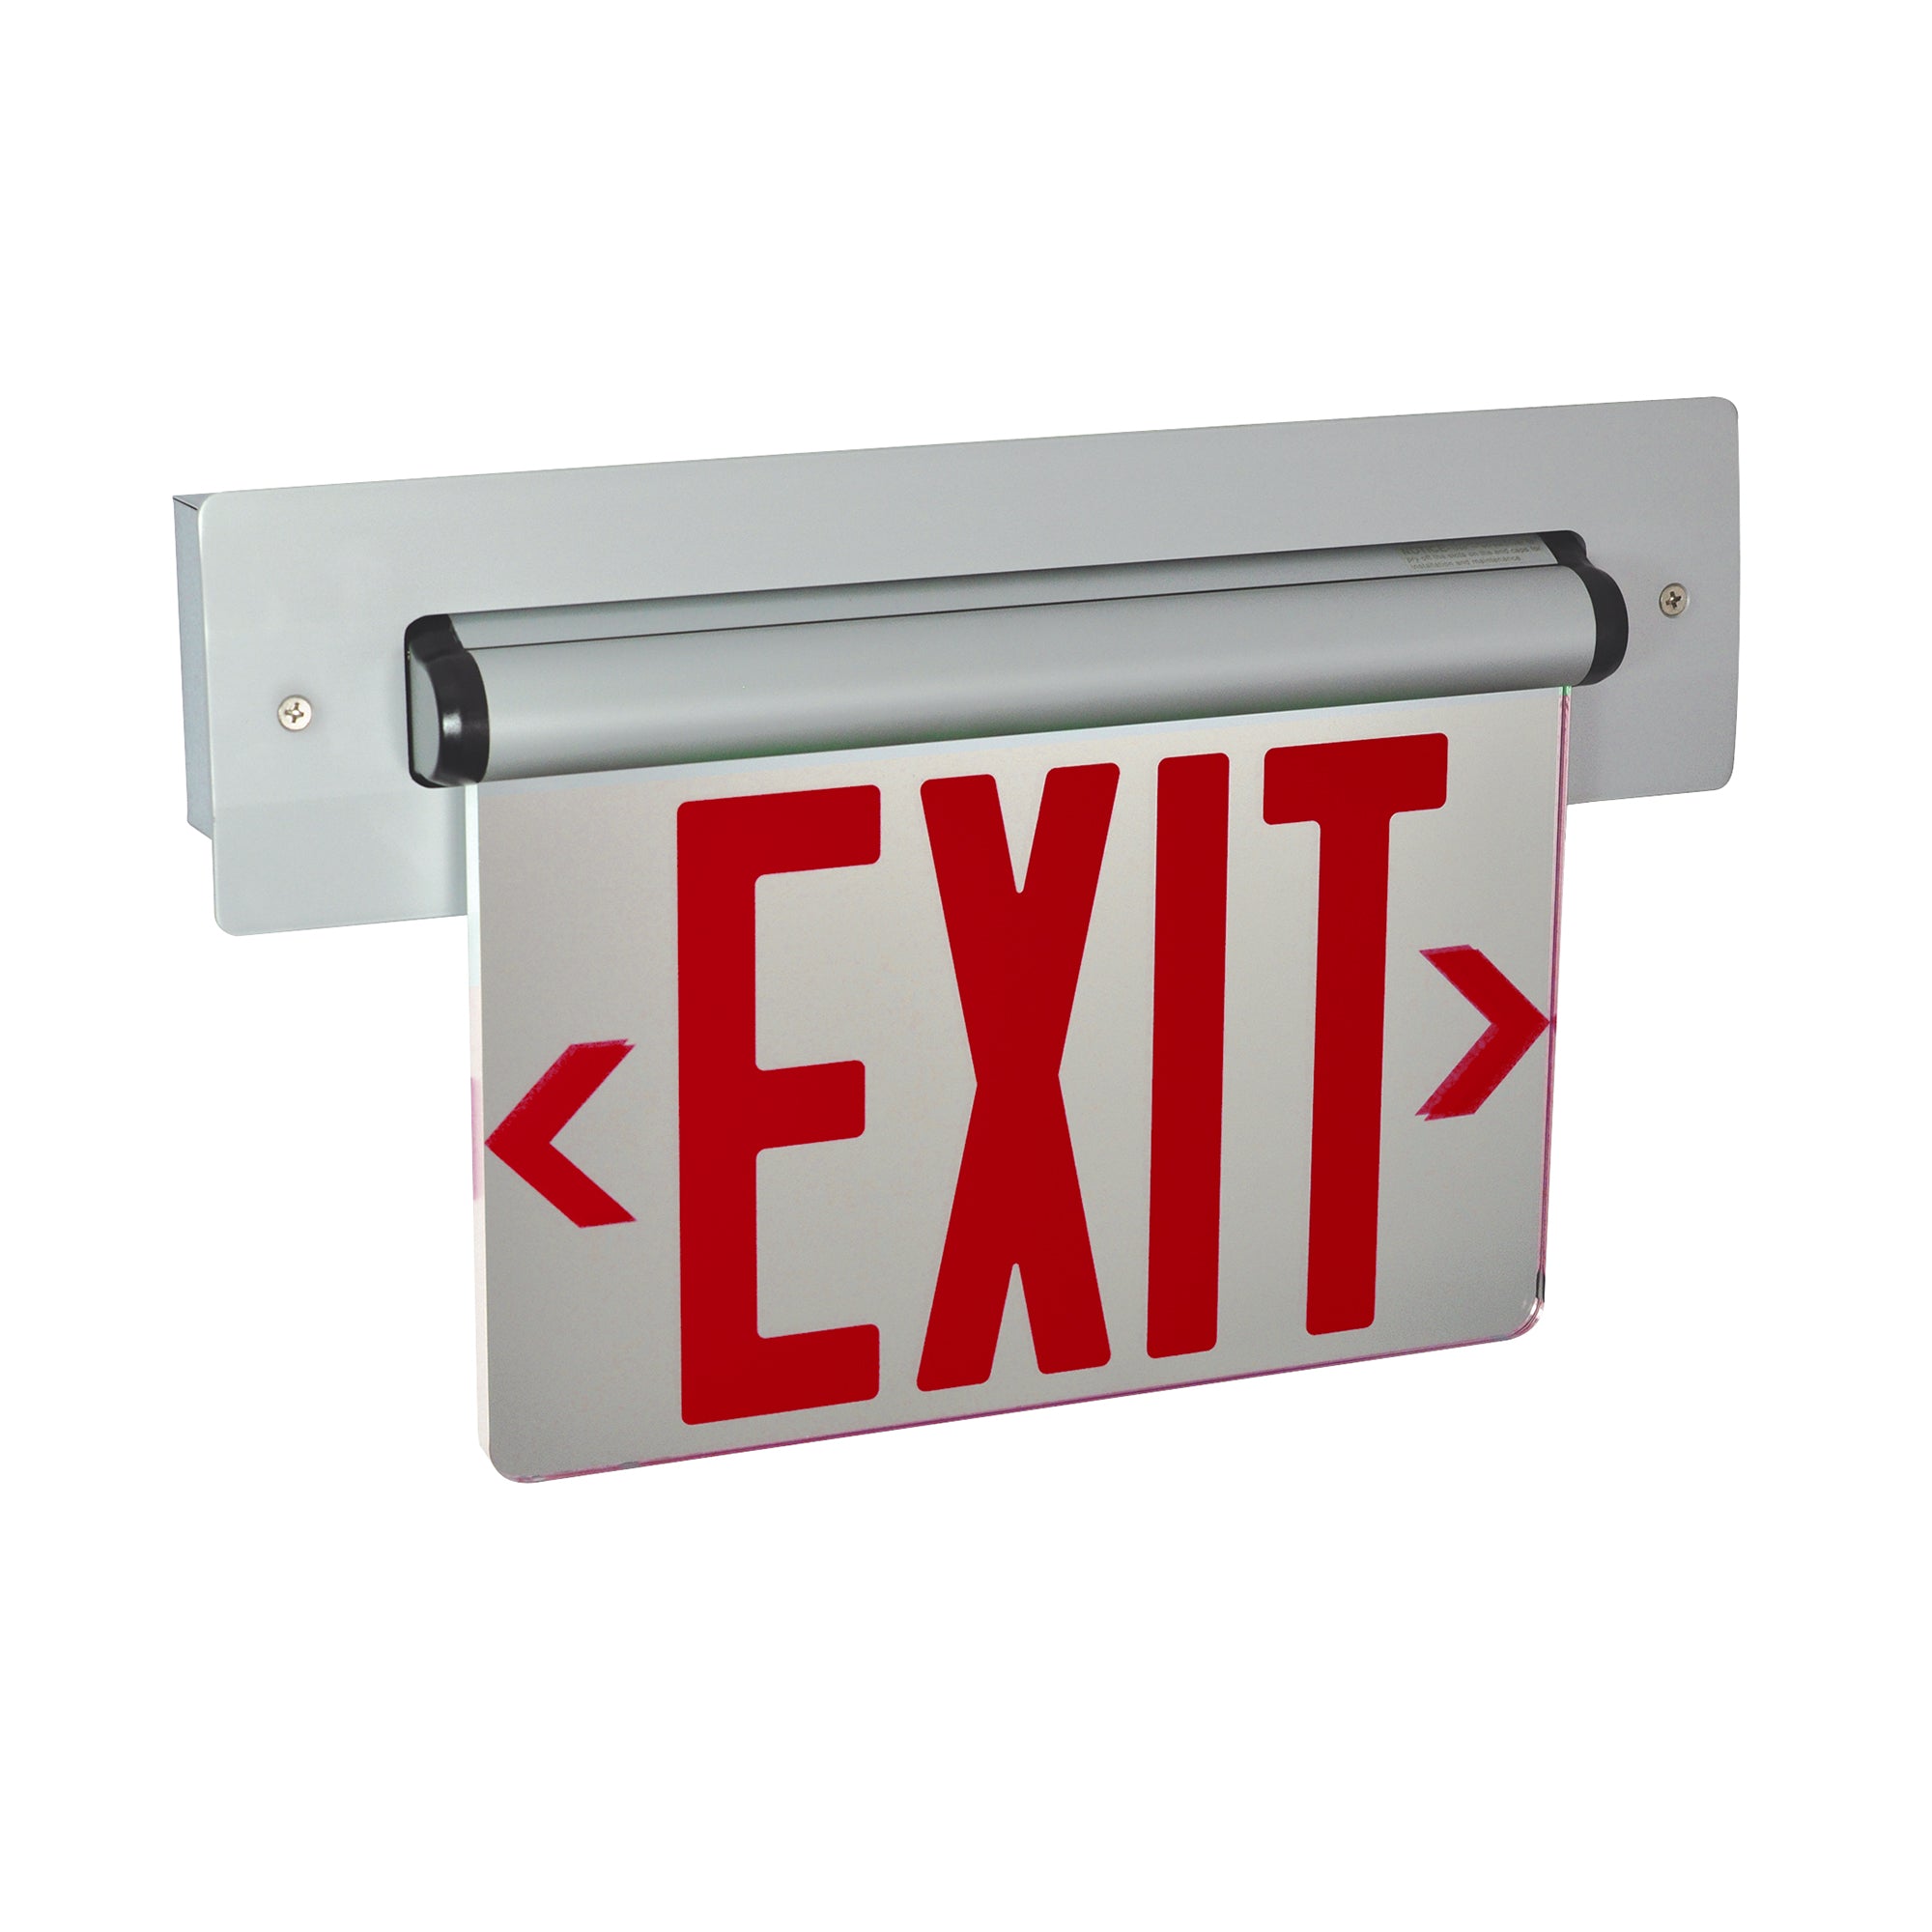 Nora Lighting NX-814-LEDRMW - Exit / Emergency - Recessed Adjustable LED Edge-Lit Exit Sign, 2 Circuit, 6 Inch Red Letters, Single Face / Mirrored Acrylic, White Housing